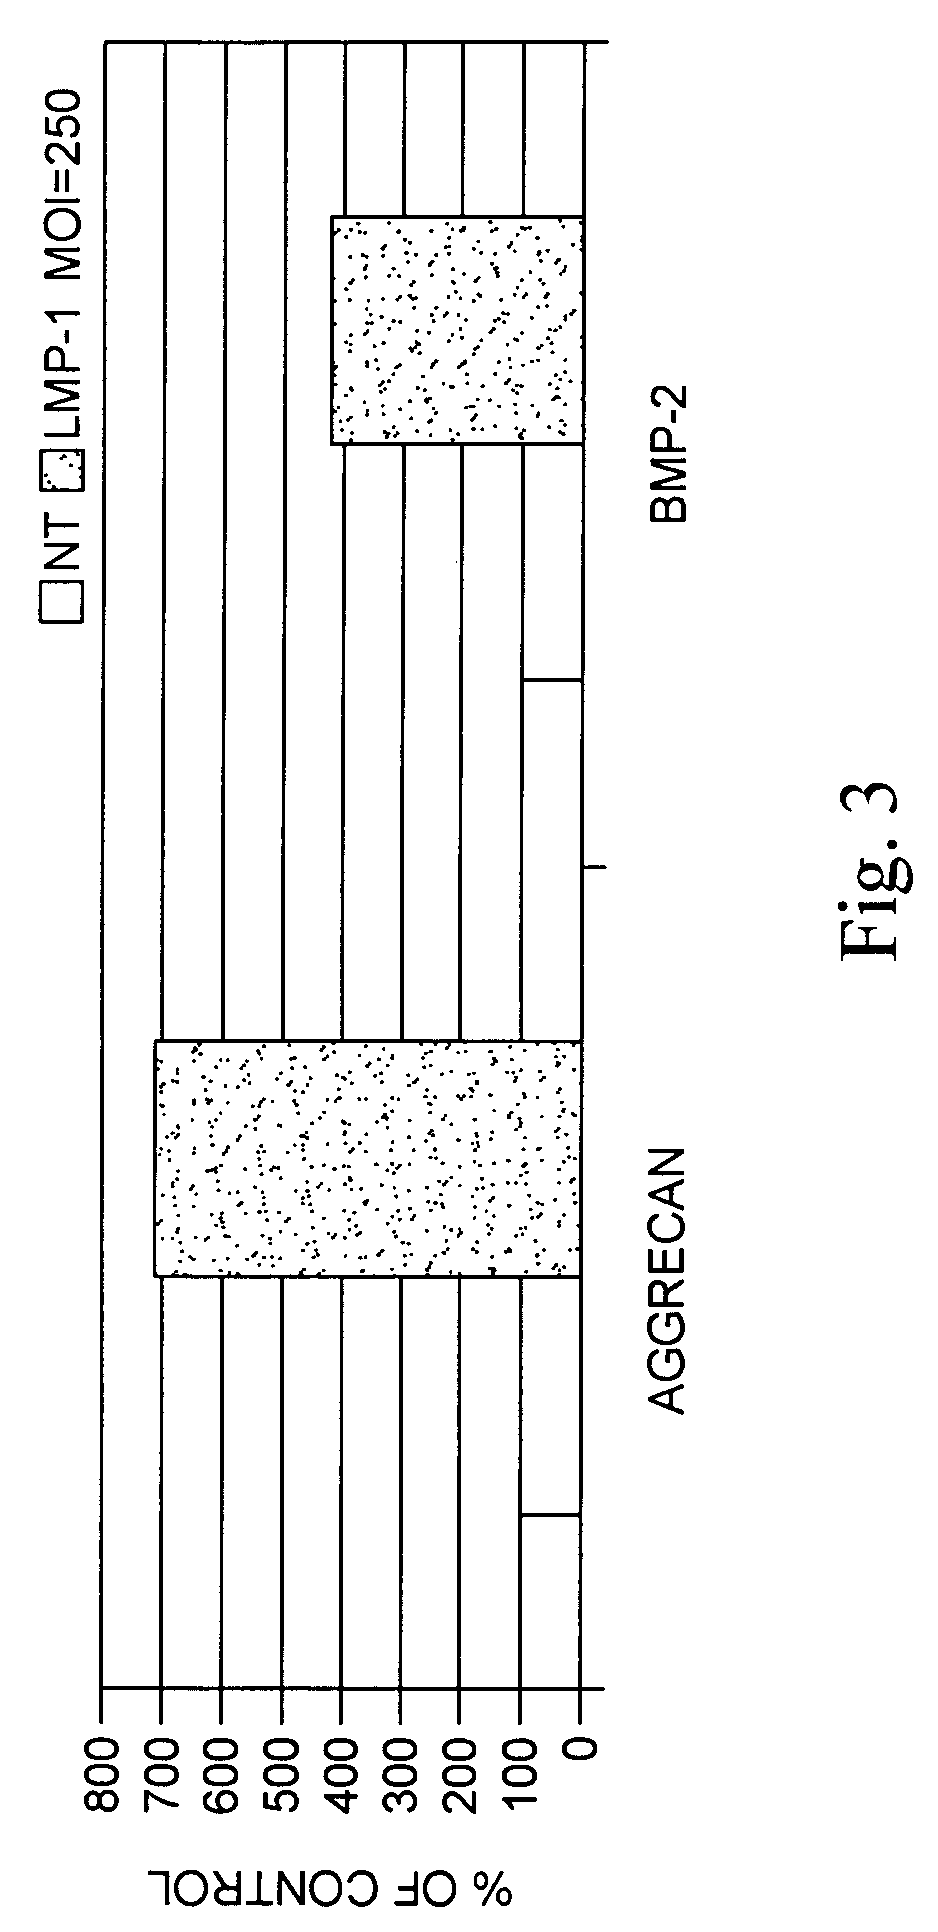 Methods of expressing LIM mineralization protein